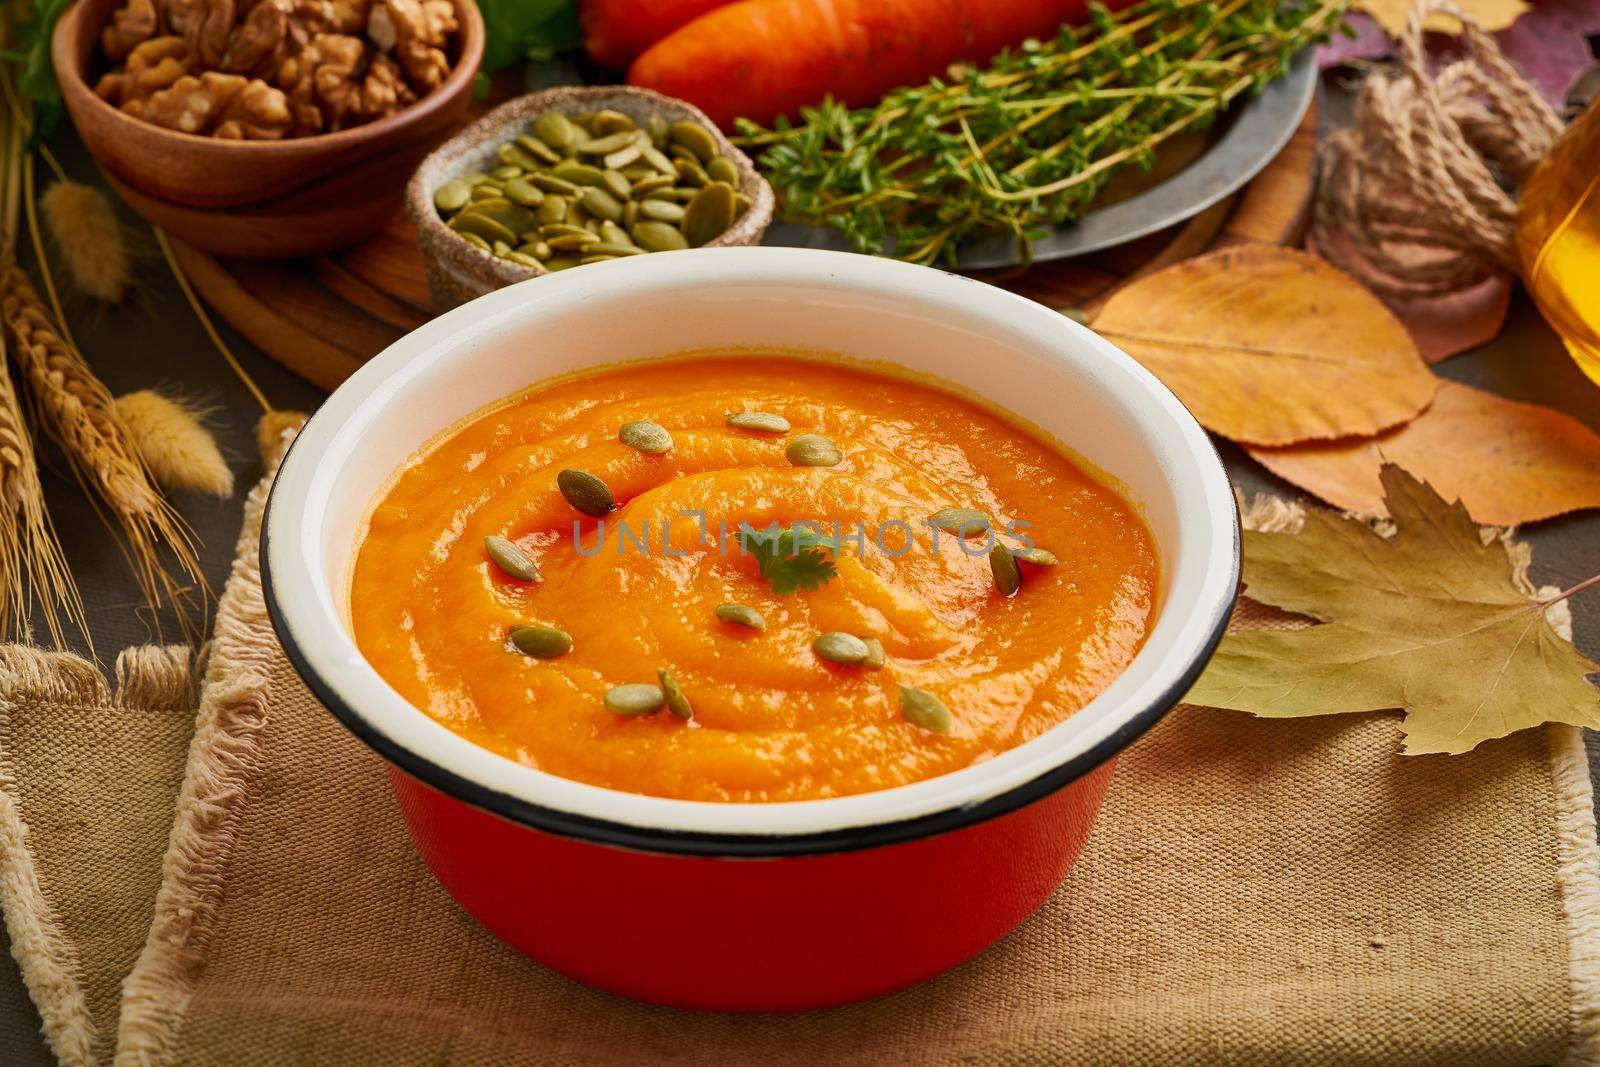 autumn dish for vegetarians, pumpkin cream soup with nuts and seeds, carrot, healthy lunch